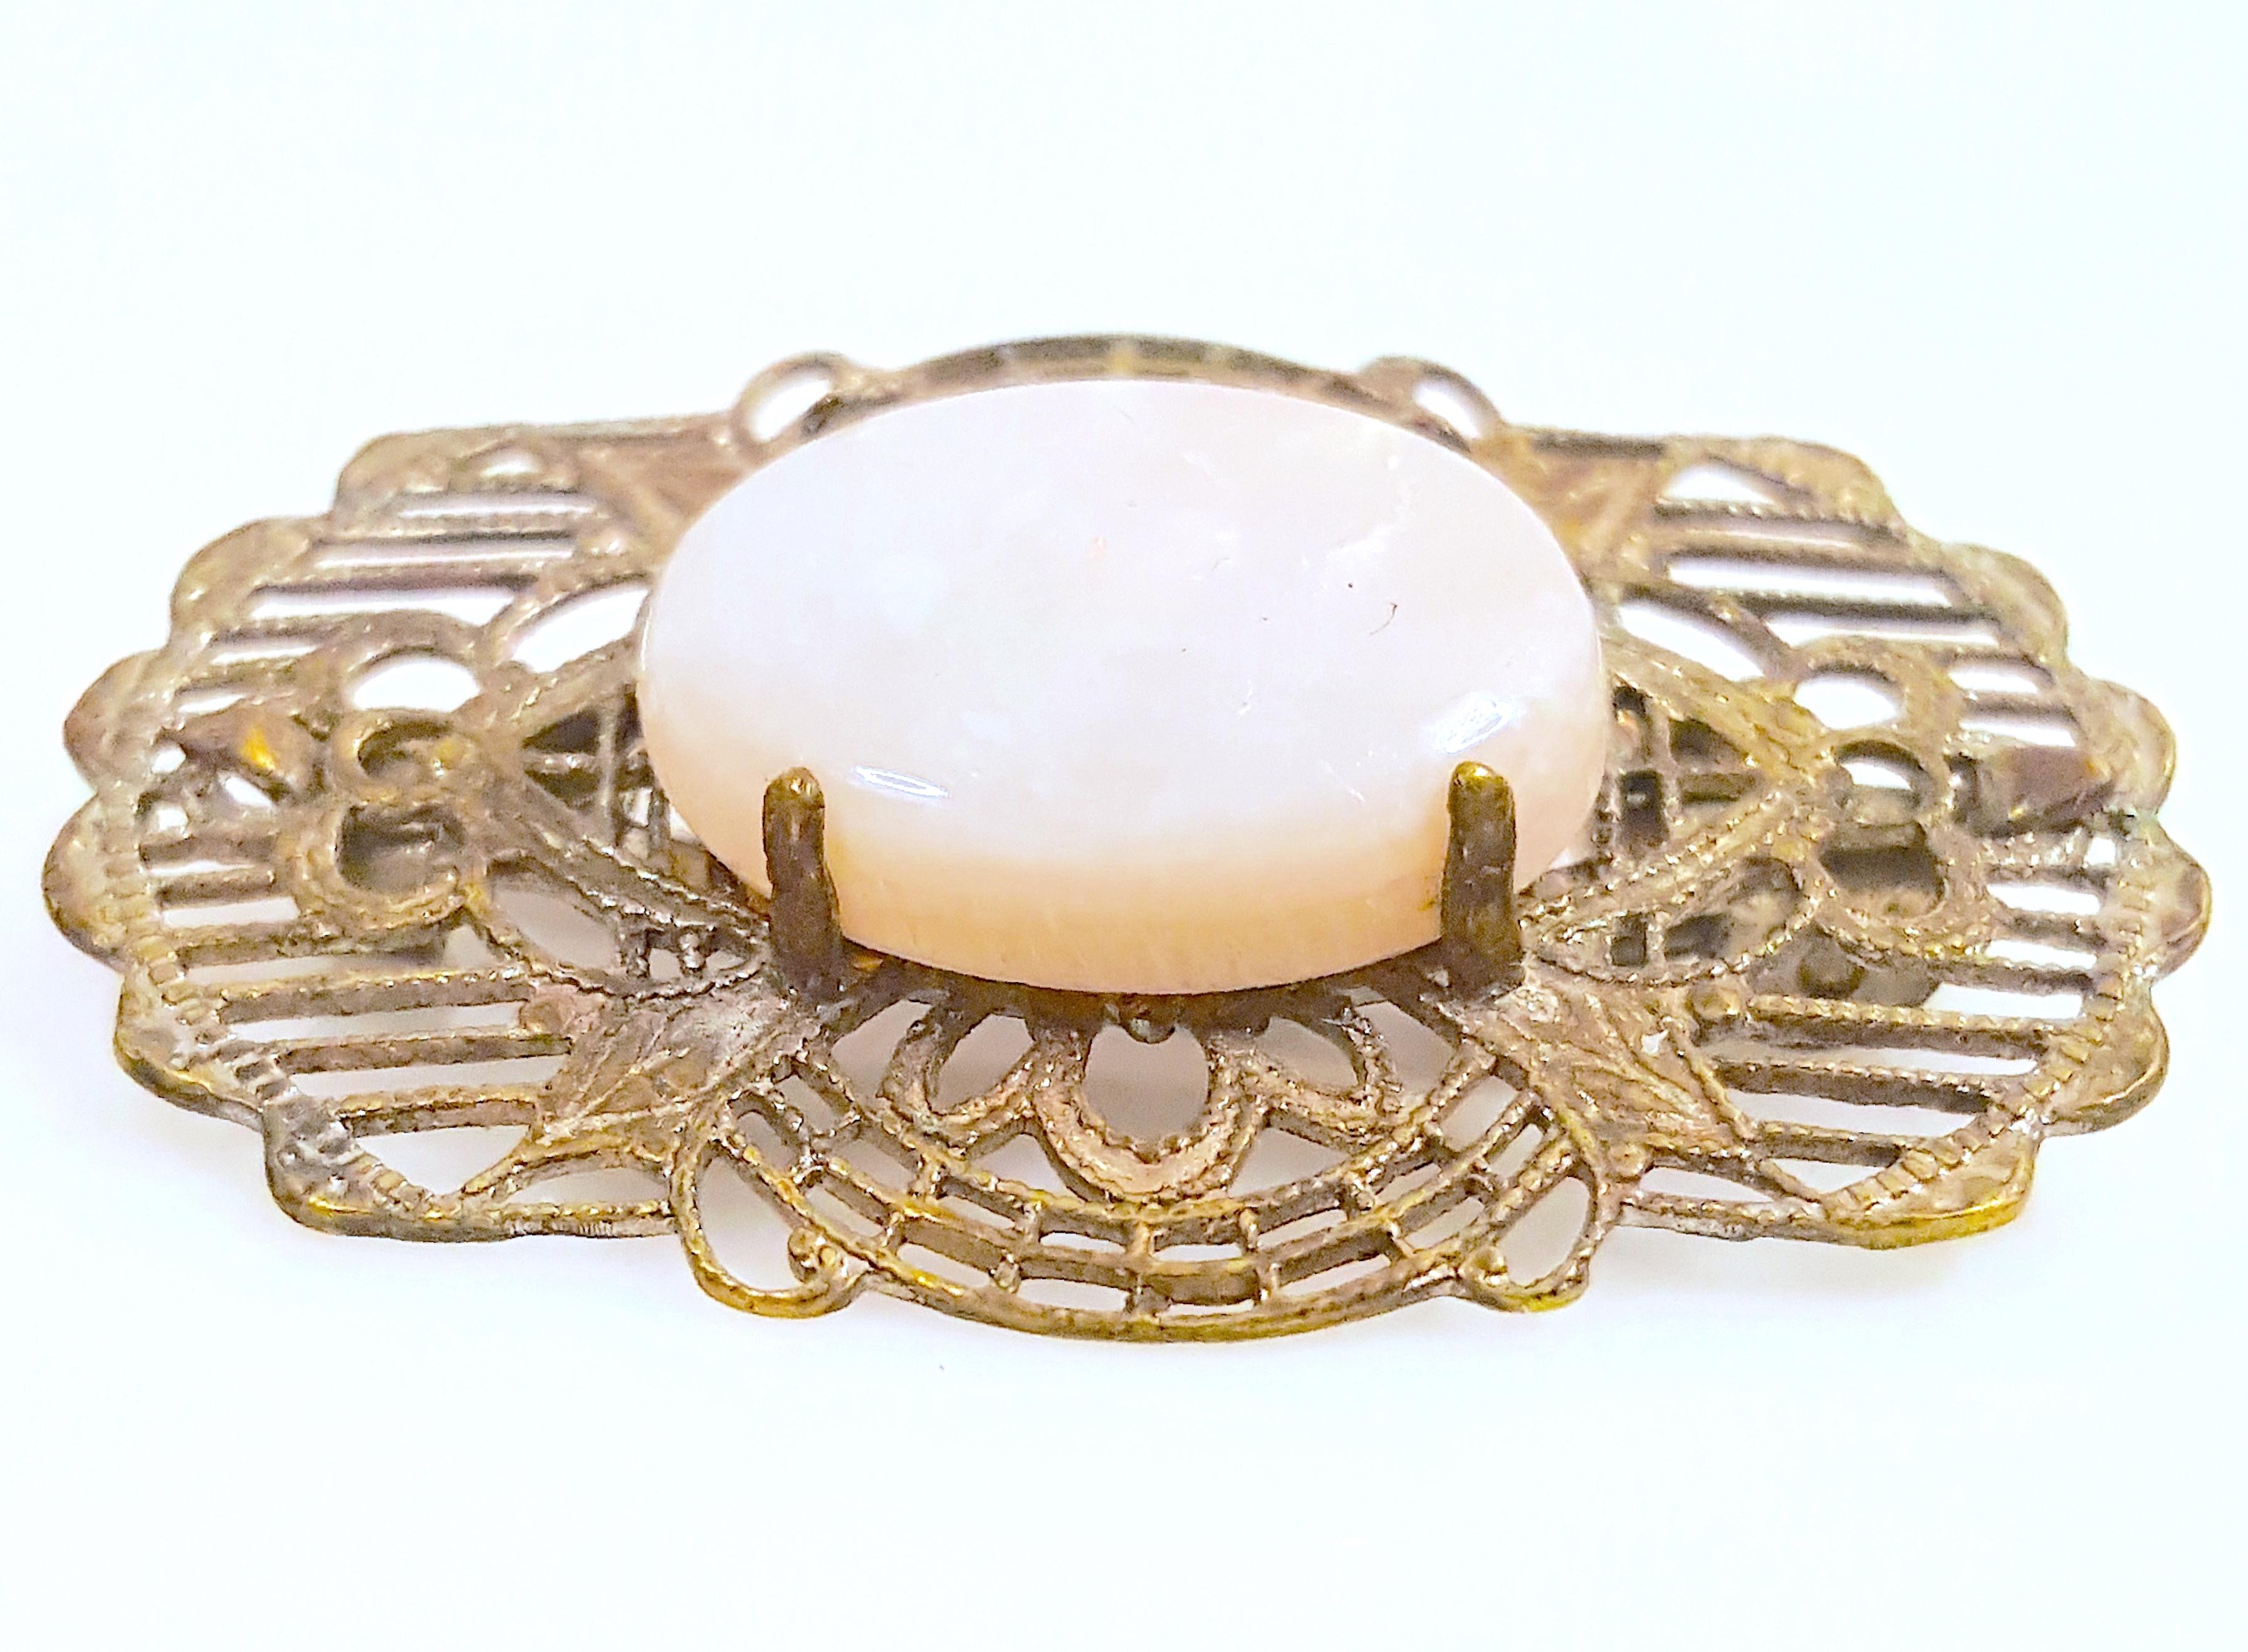 Antique ProngSetWhiteJade GoldMilgrainFiligree ConvertibleBrooch RingTop Pendant In Good Condition For Sale In Chicago, IL